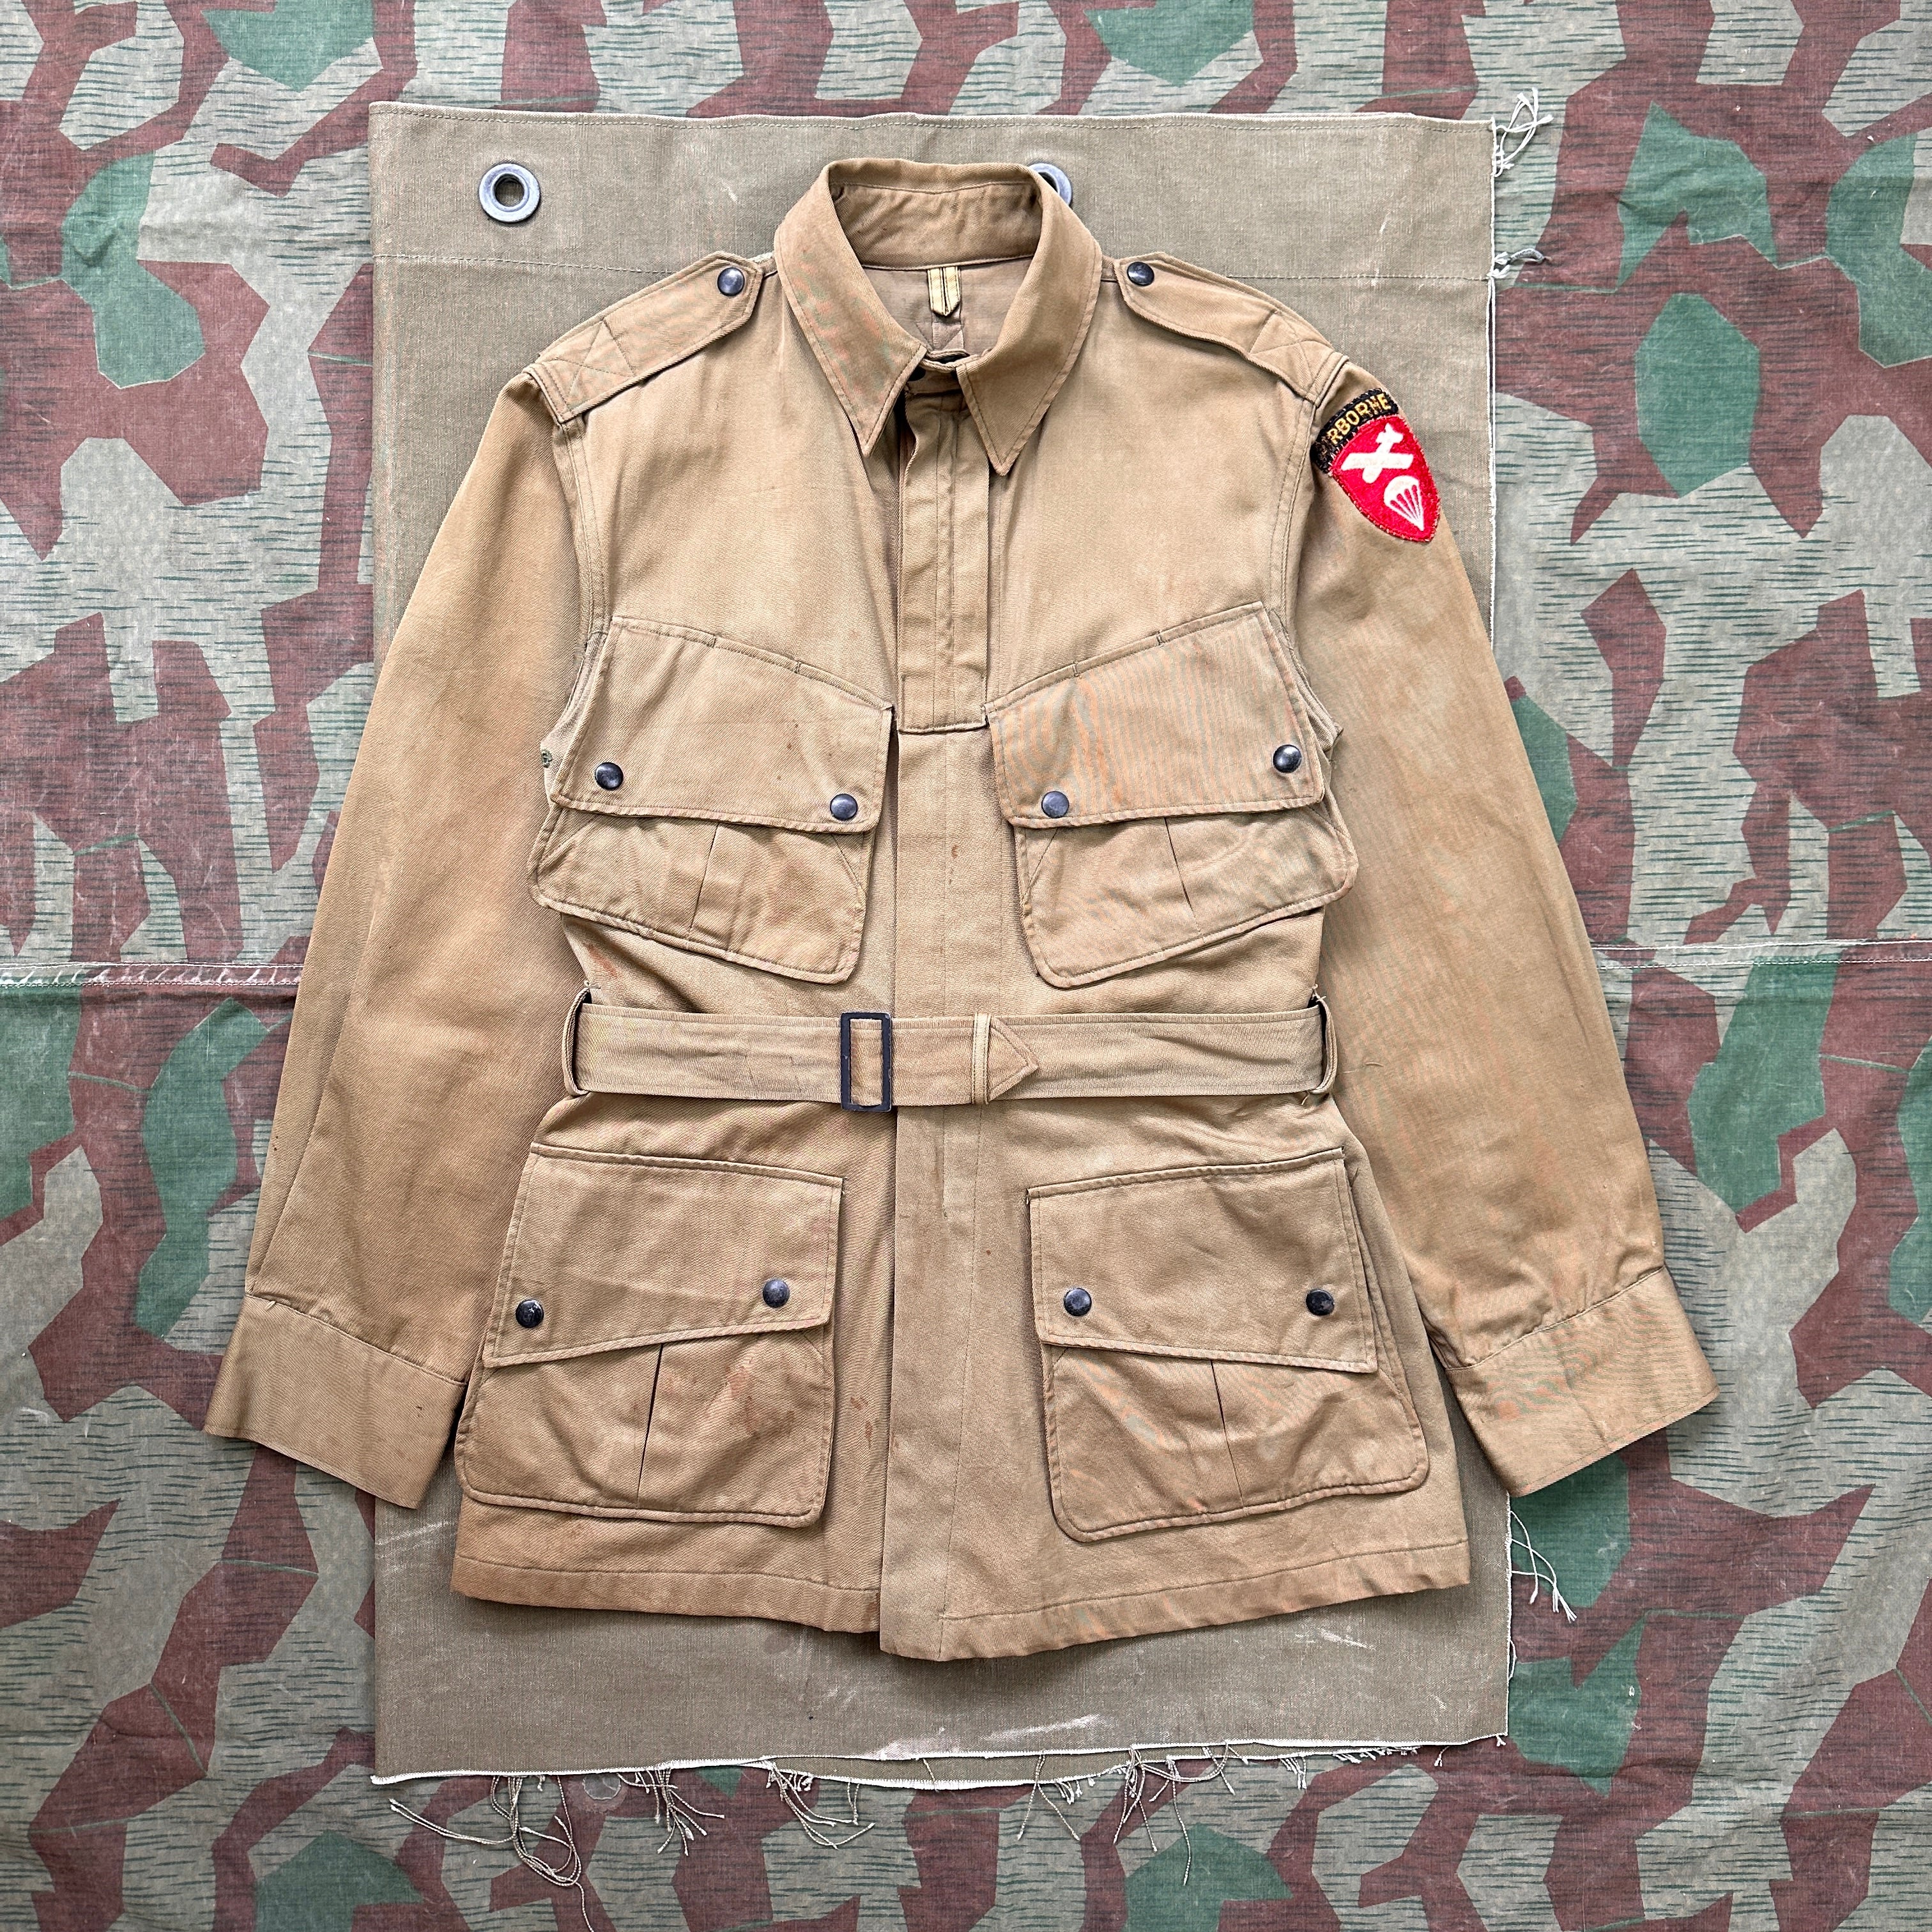 US Army M42 Paratrooper Jump Jacket – The Major's Tailor